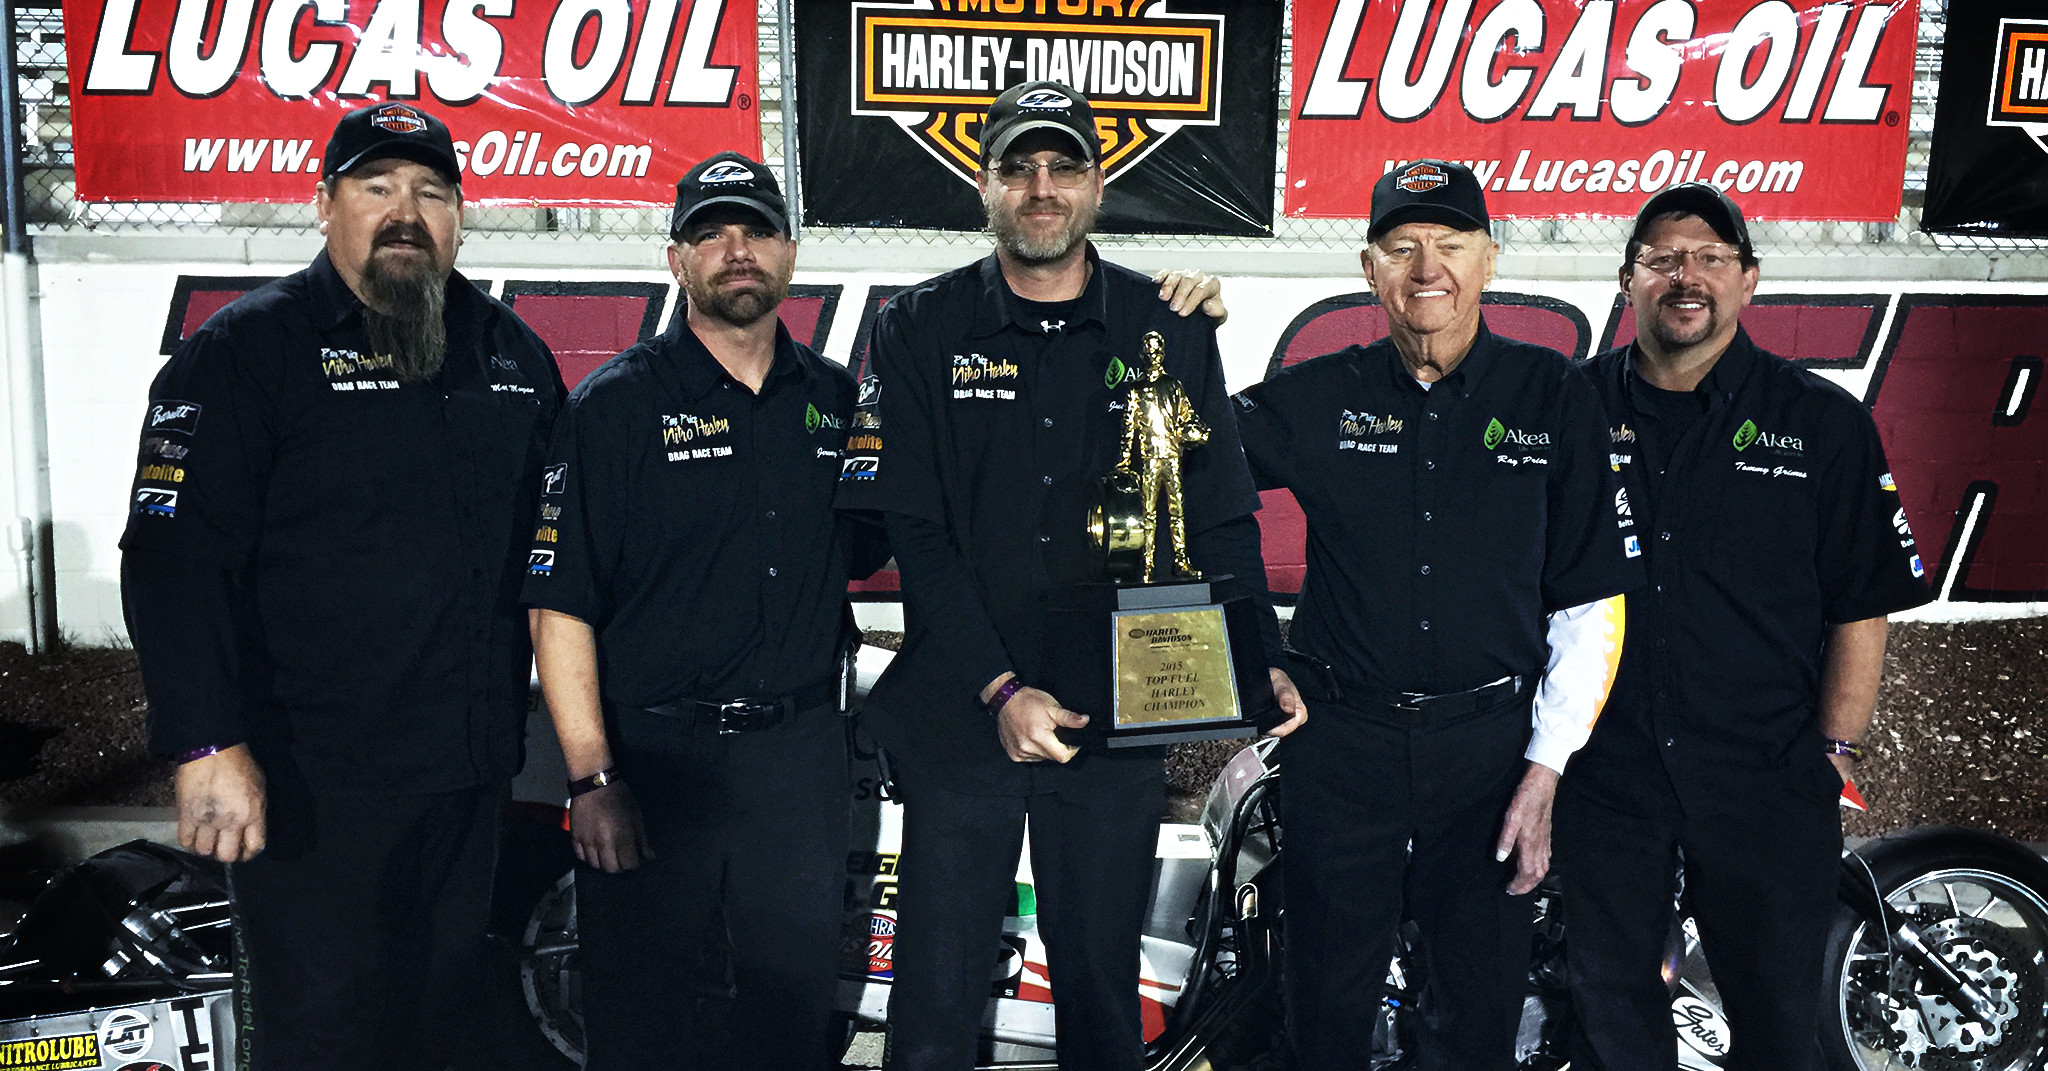 Ray Price Motorsports Racing won back-to-back NHRA championships (L to R): manager Mark Morgan,crew chief Jeremy Hoy, engine builder Justin Heinle, owner Ray Price (deceased), racer Tommy Grimes.